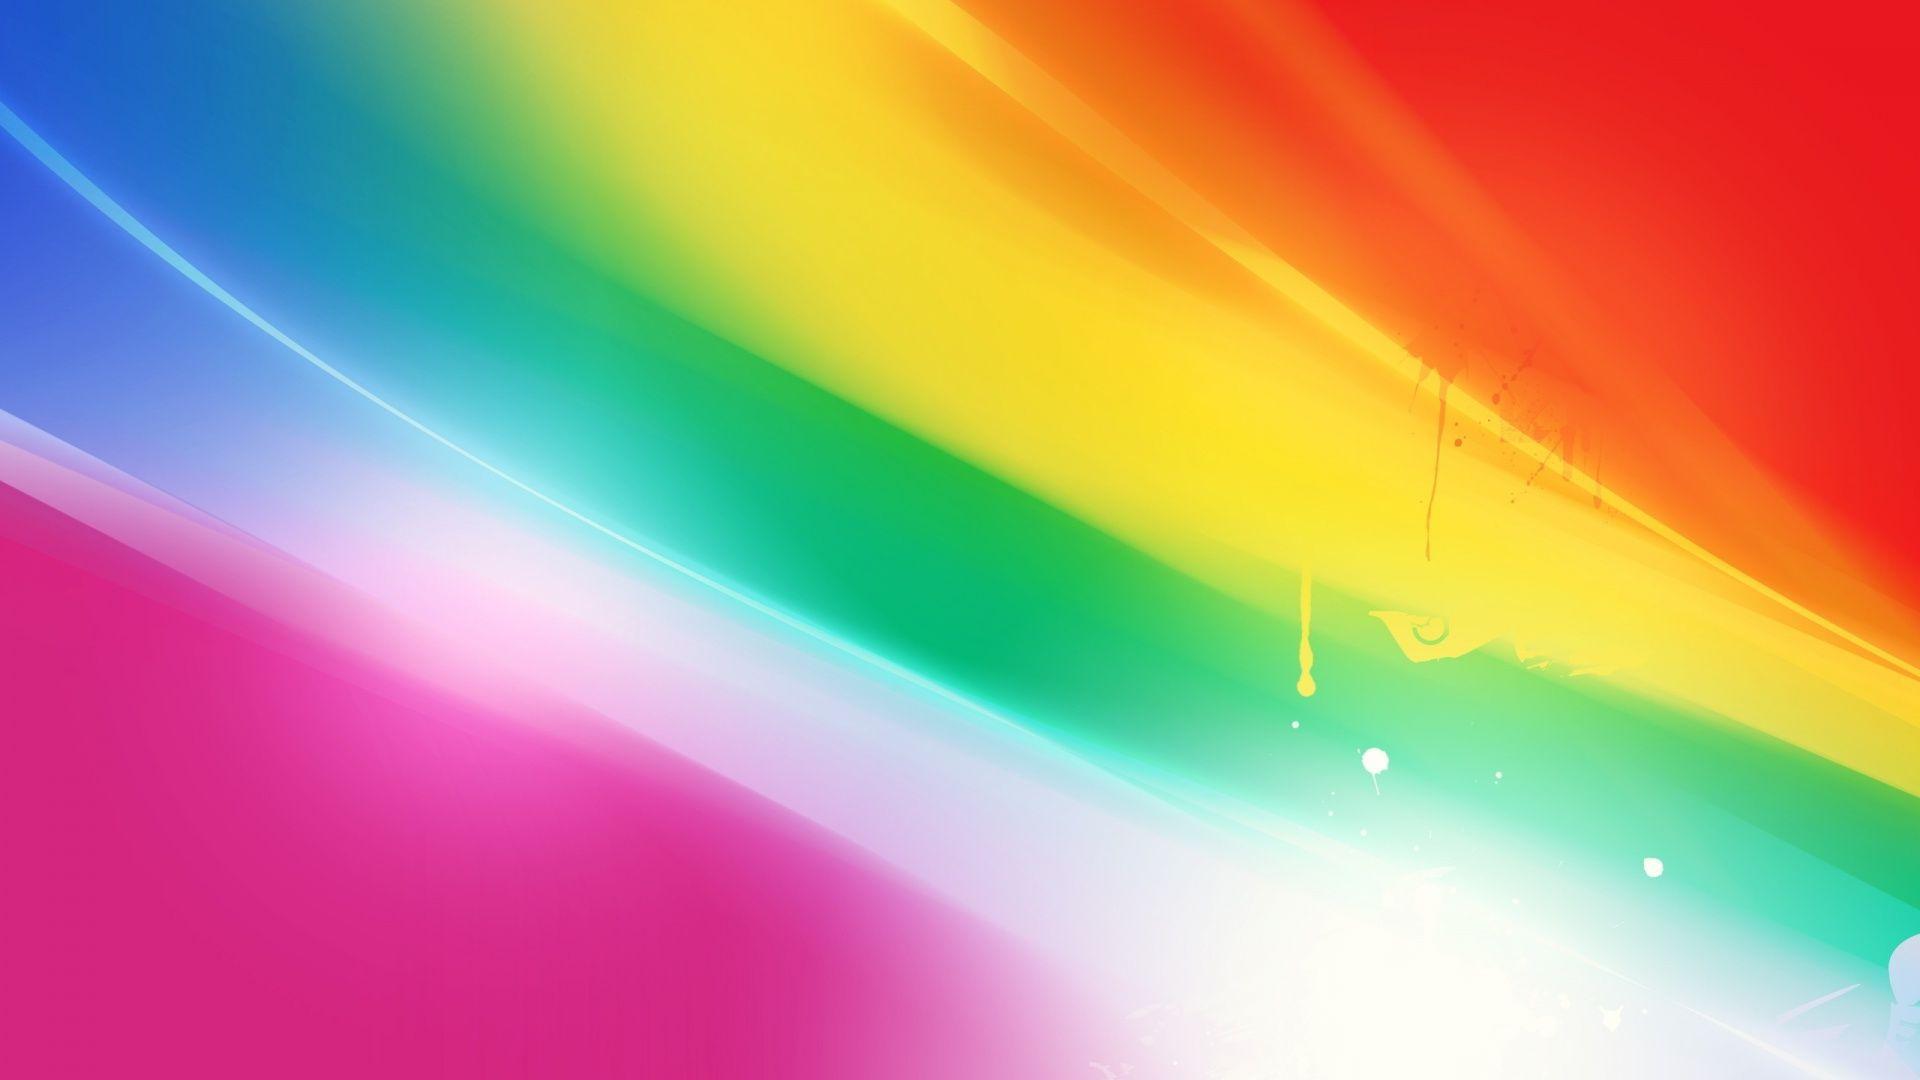 Wallpaper For > Colorful Rainbow Wallpaper